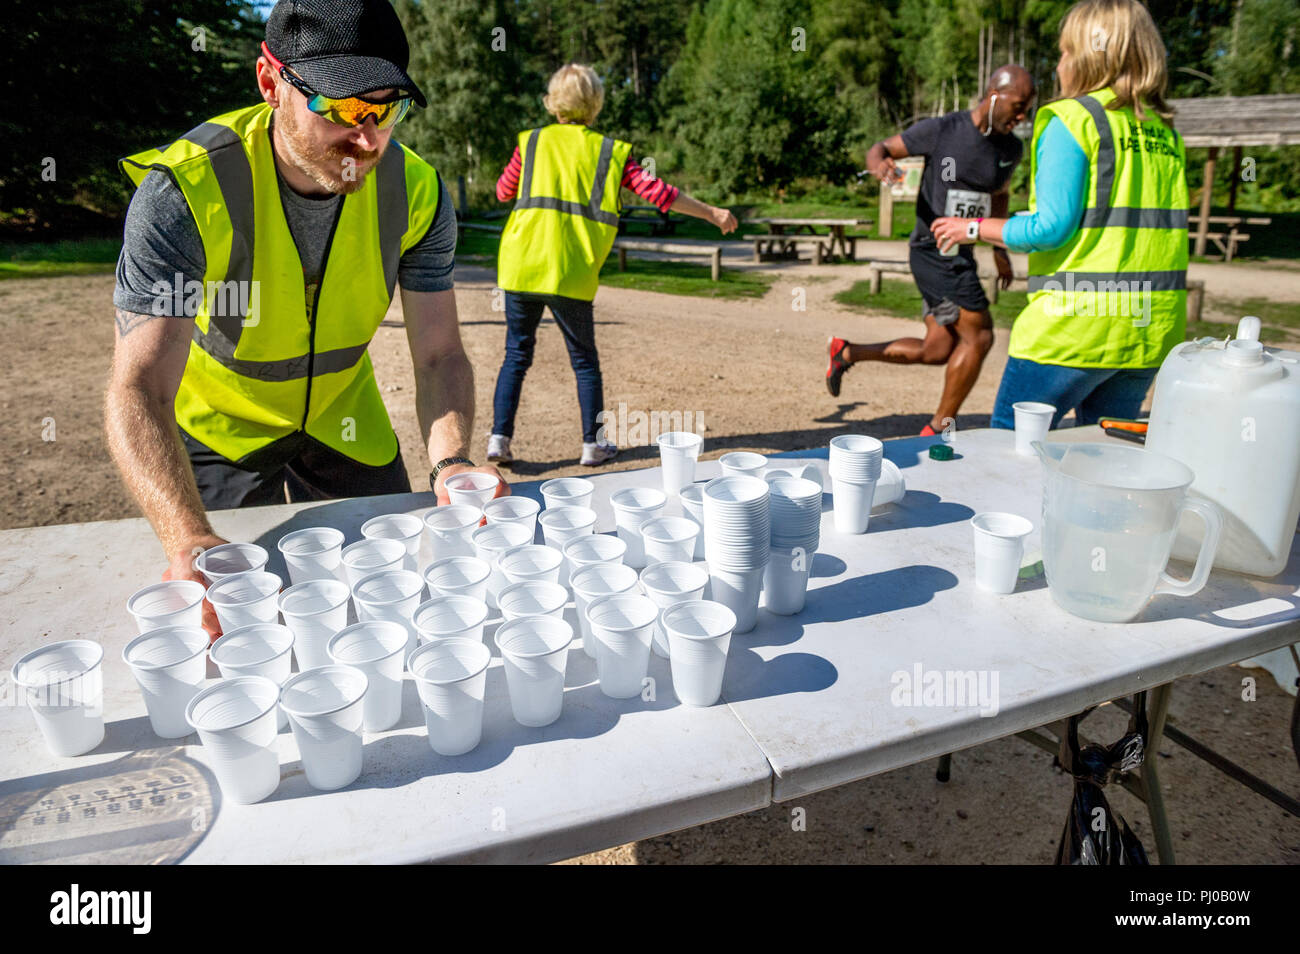 White plastic cups filled with water to be handed to runner on a hot day. Stock Photo